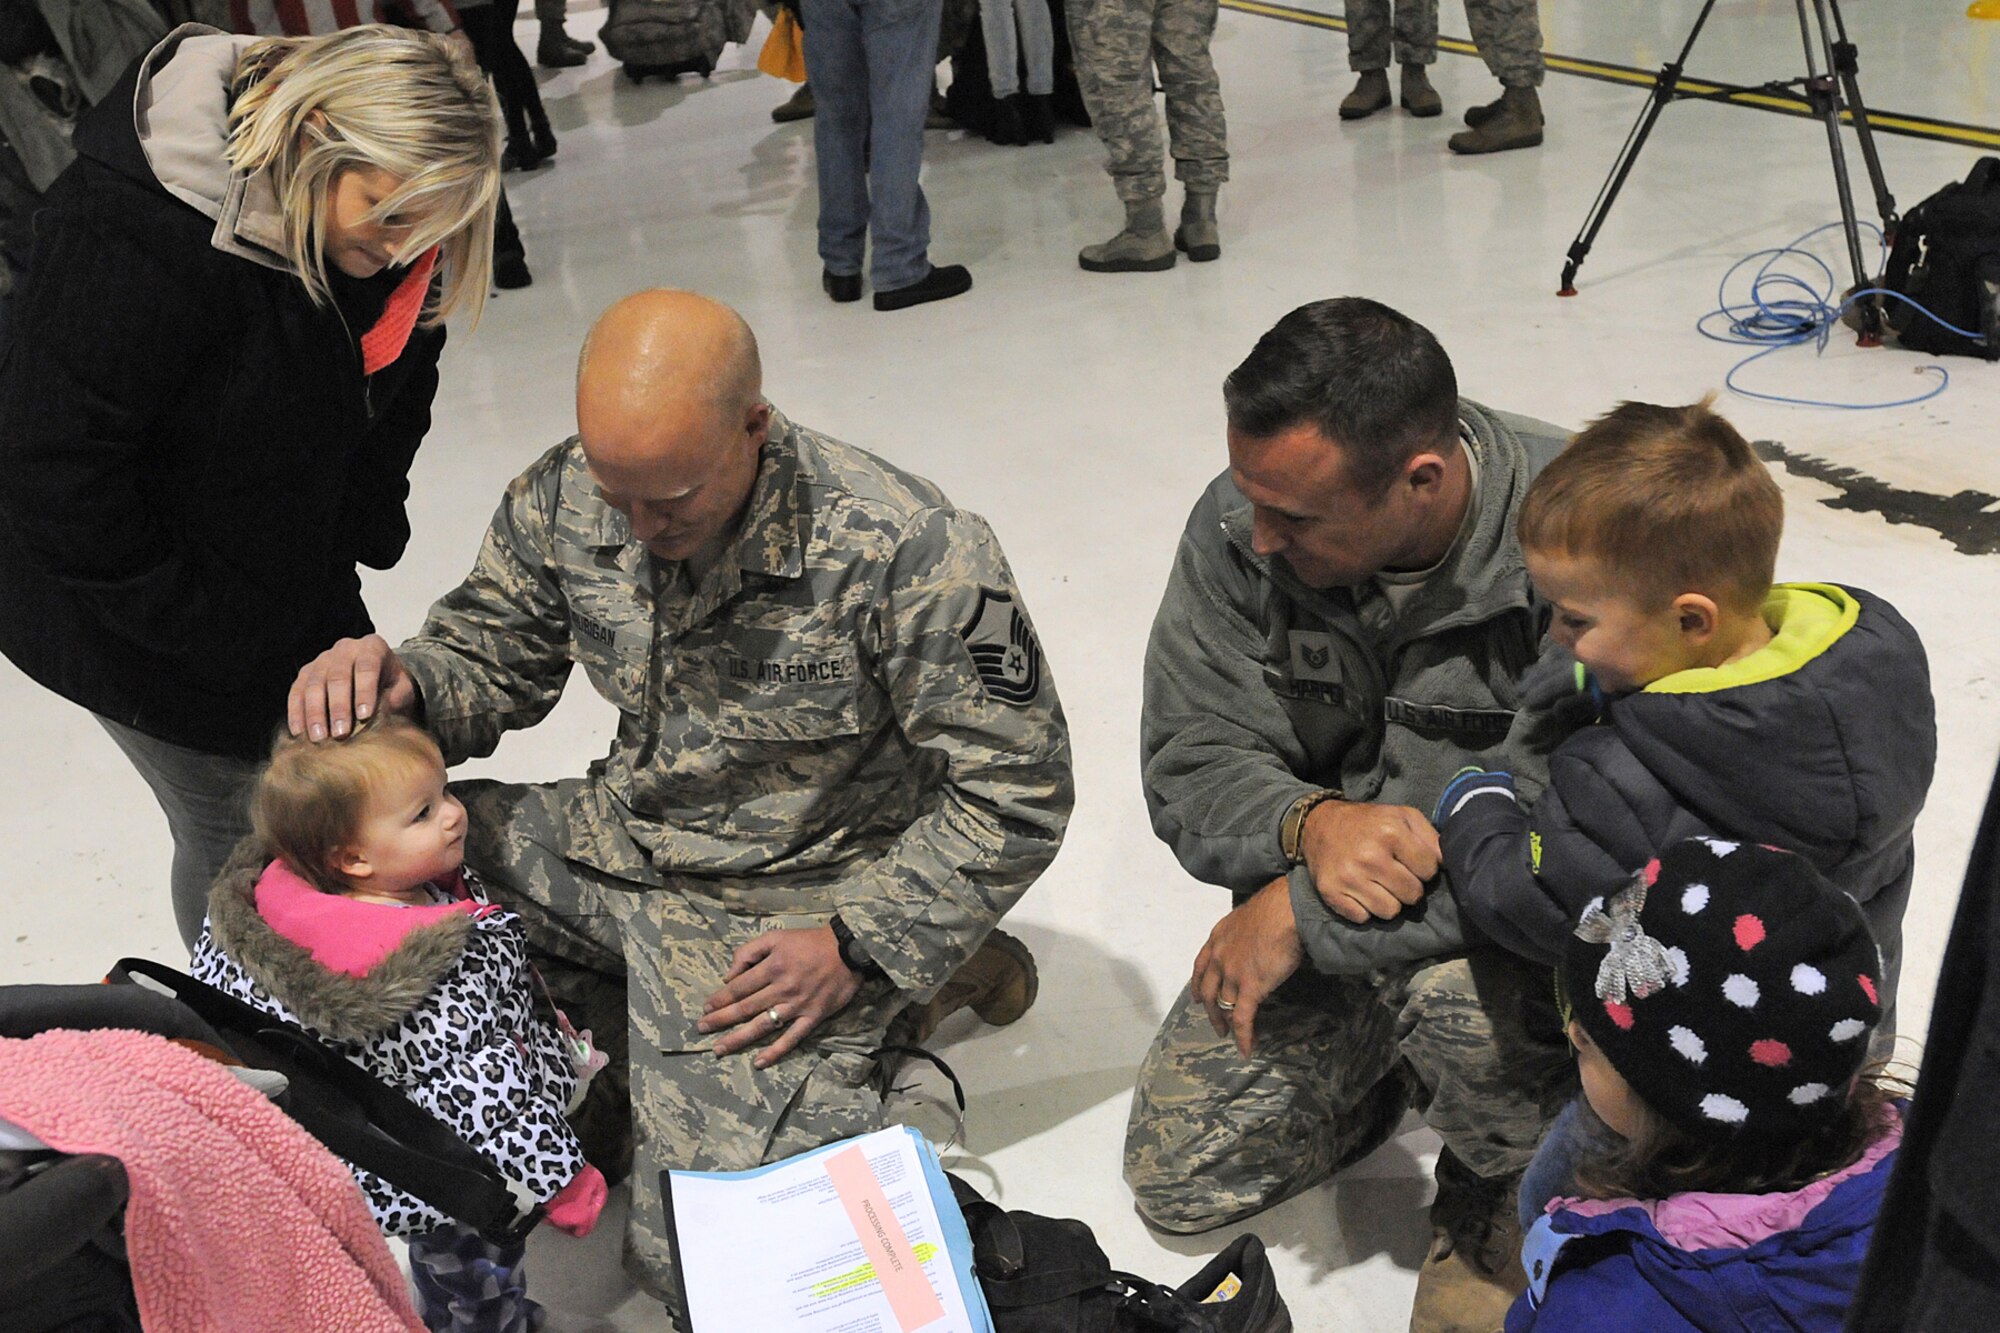 Master Sgt. Matthew Hourigan (left) and Tech Sgt. Jacob Harper greet their children in Louisville, Ky., after the Airmen returned from a deployment, Nov. 19, 2014. The Airmen with the 123rd Contingency Response Group deployed to West Africa in support of Operation United Assistance, the international effort to fight Ebola. (U.S. Army National Guard photo by Staff Sgt. Scott Raymond)
